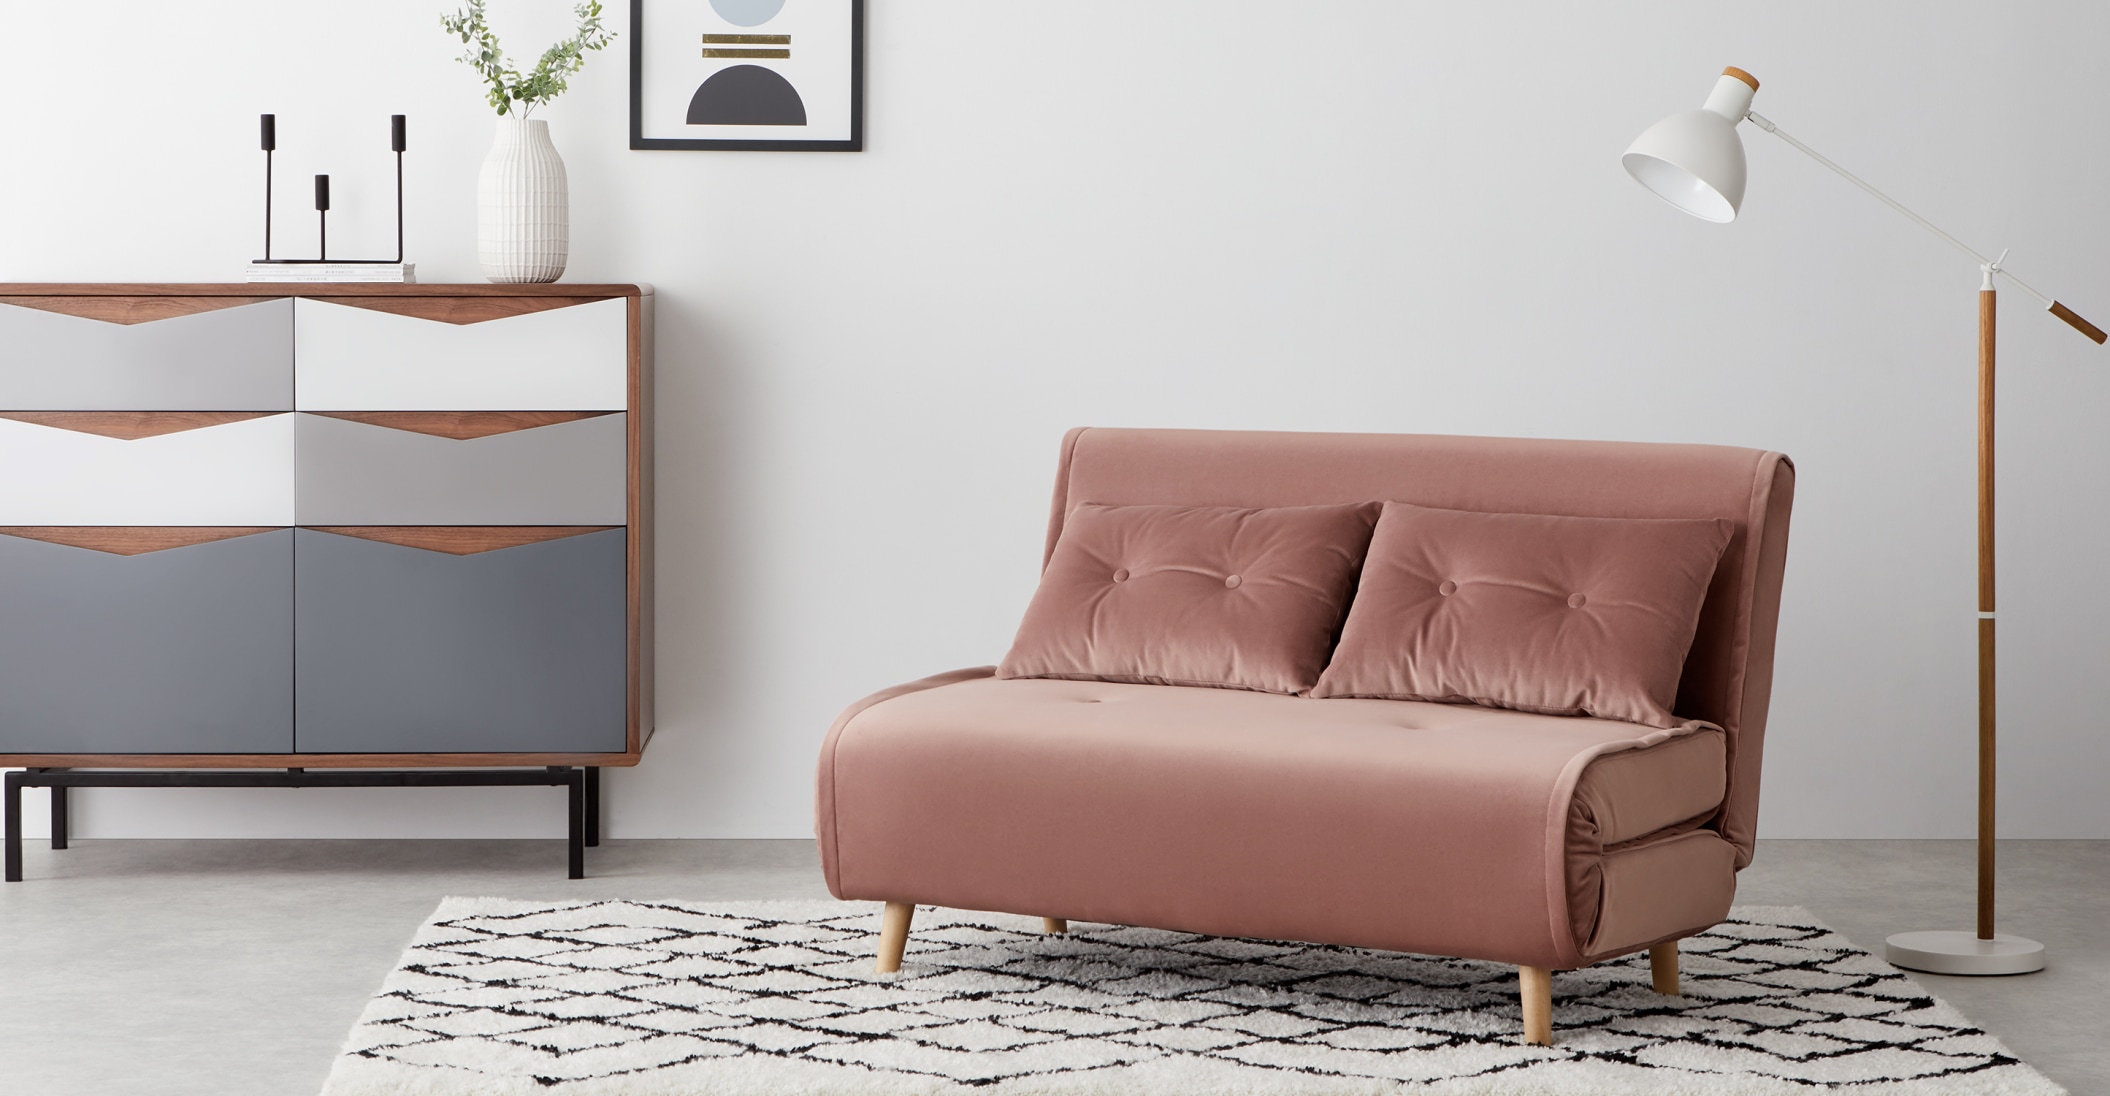 Finding The Most Comfortable Sofa Bed Of 2020 Design For Me